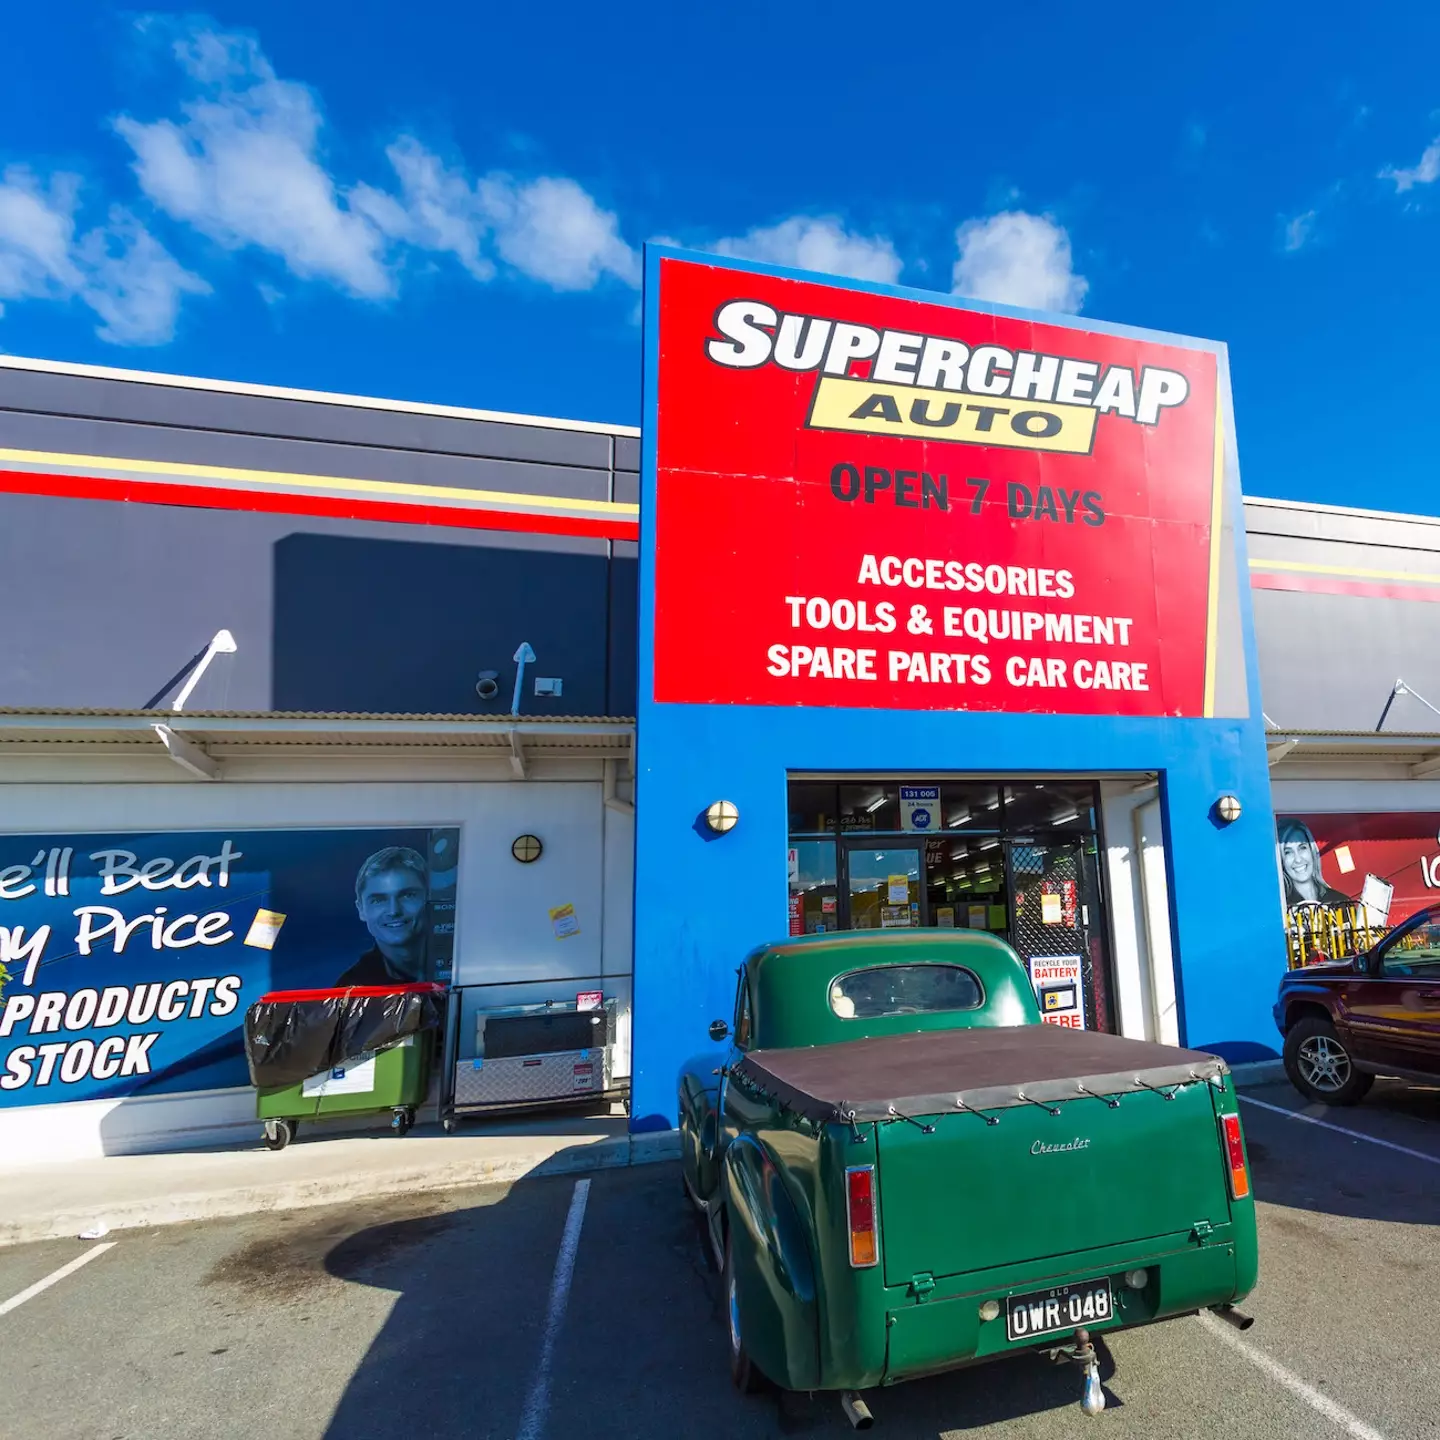 Supercheap Auto have confirmed the employee hasn't been fired and is on full pay while an investigation is carried out.